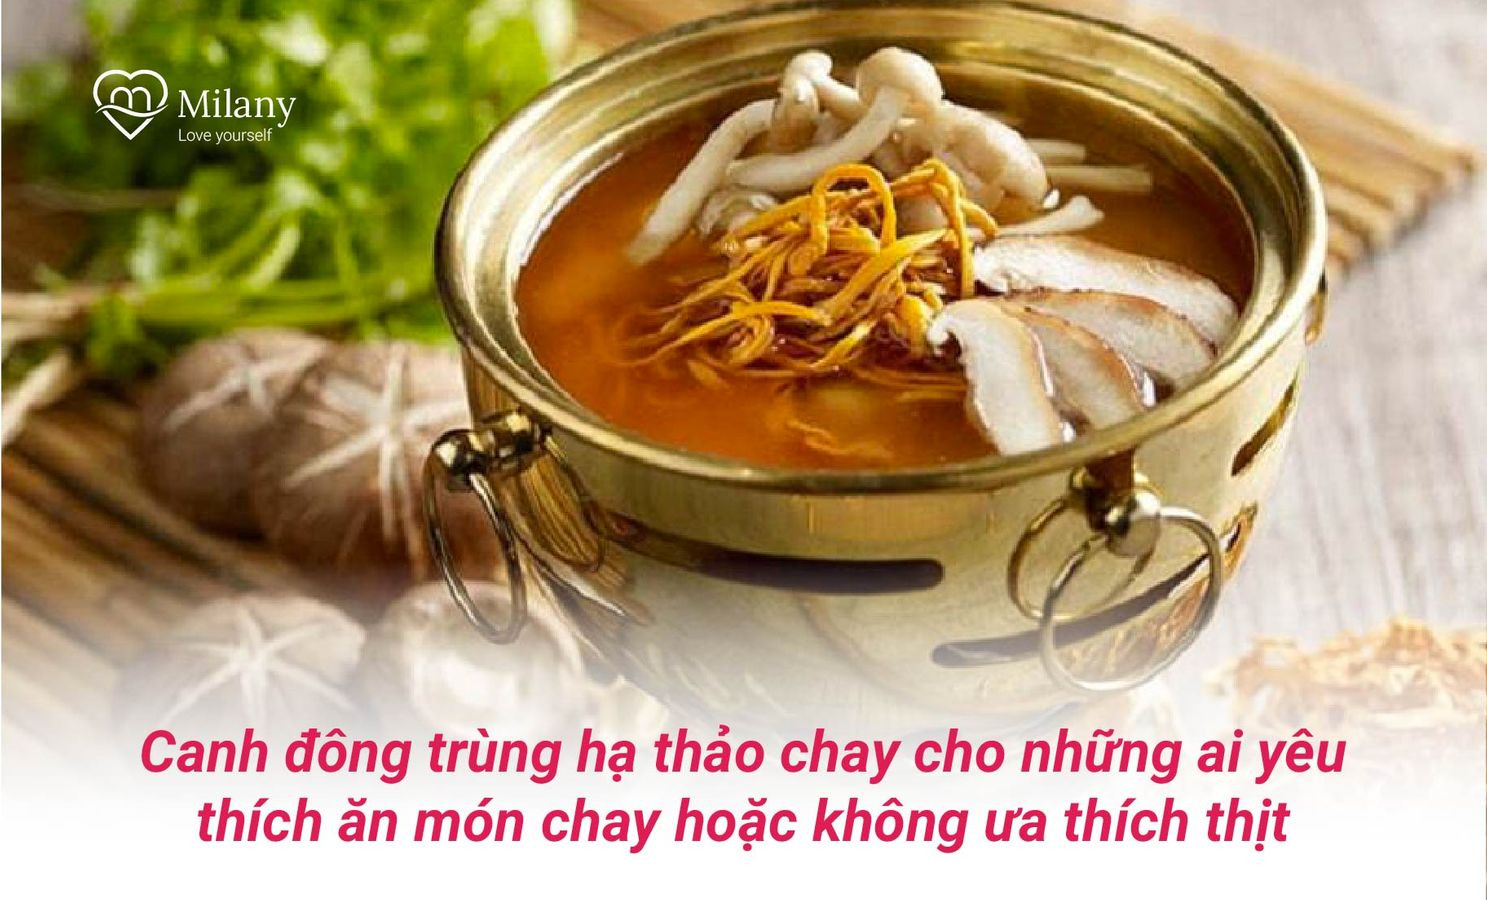 canh dong trung ha thao chay